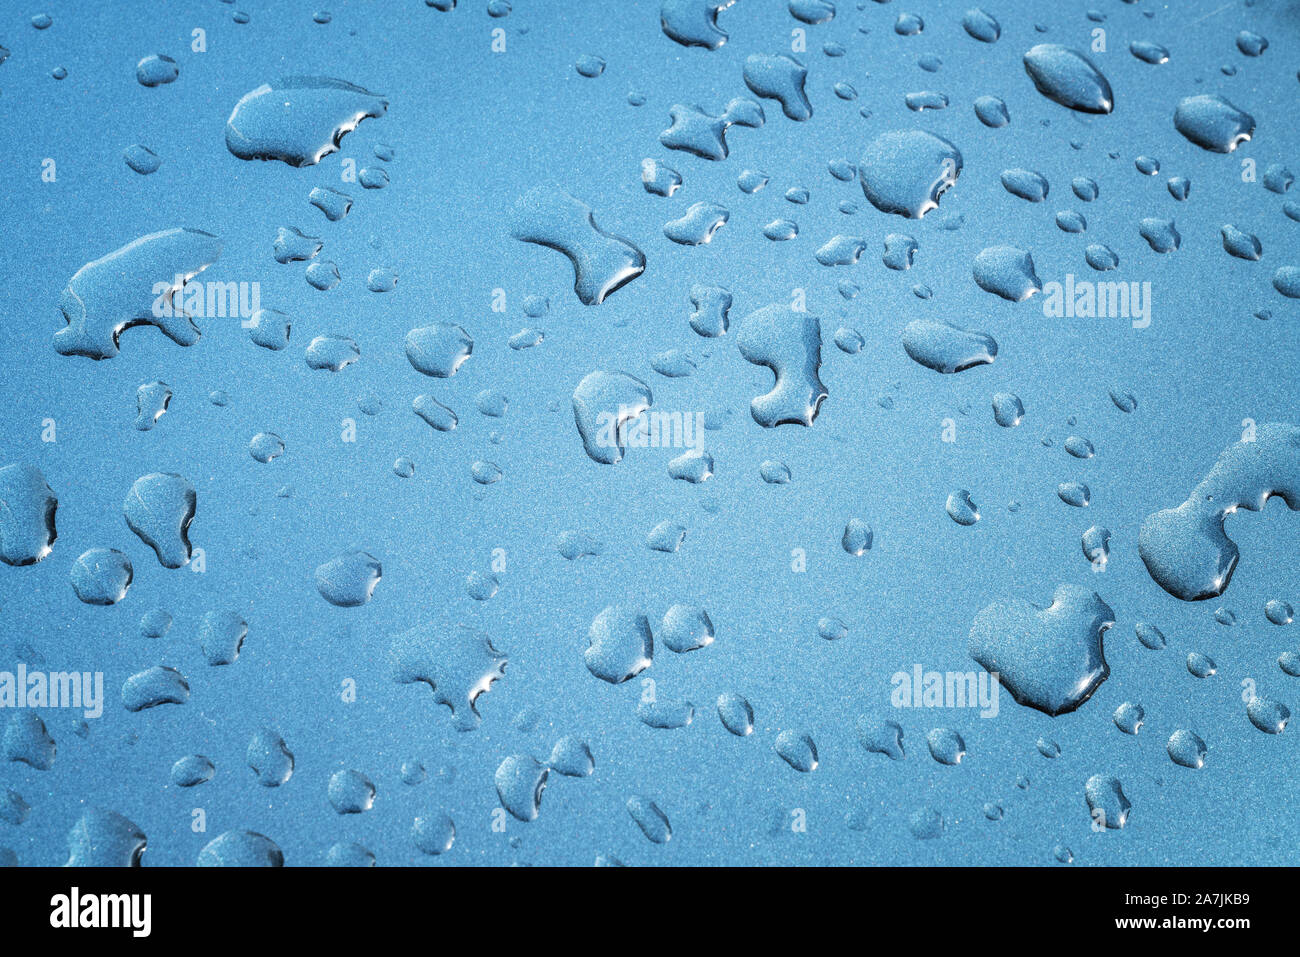 rain drops are spreaded on a meatllic surface for background. Stock Photo